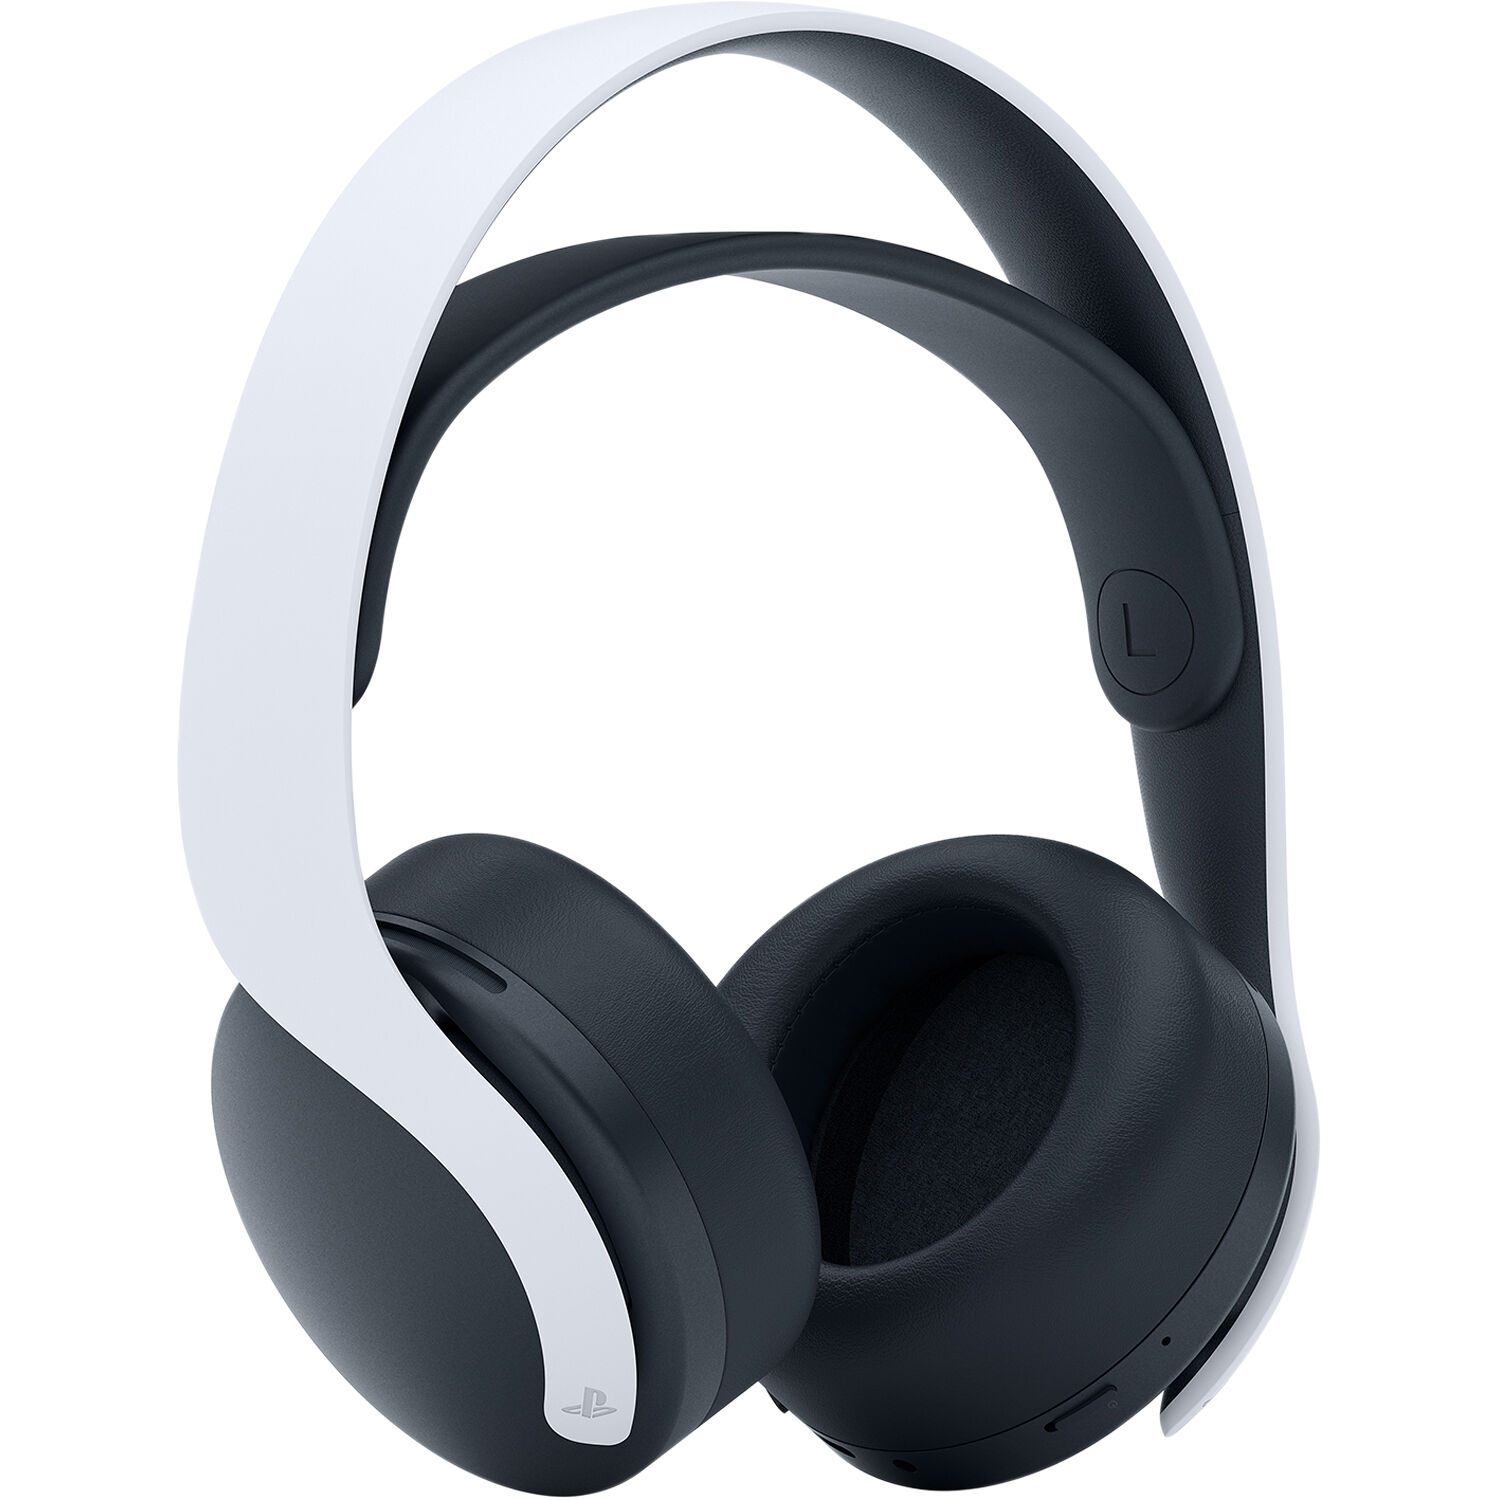 sony gaming headphones for mobile